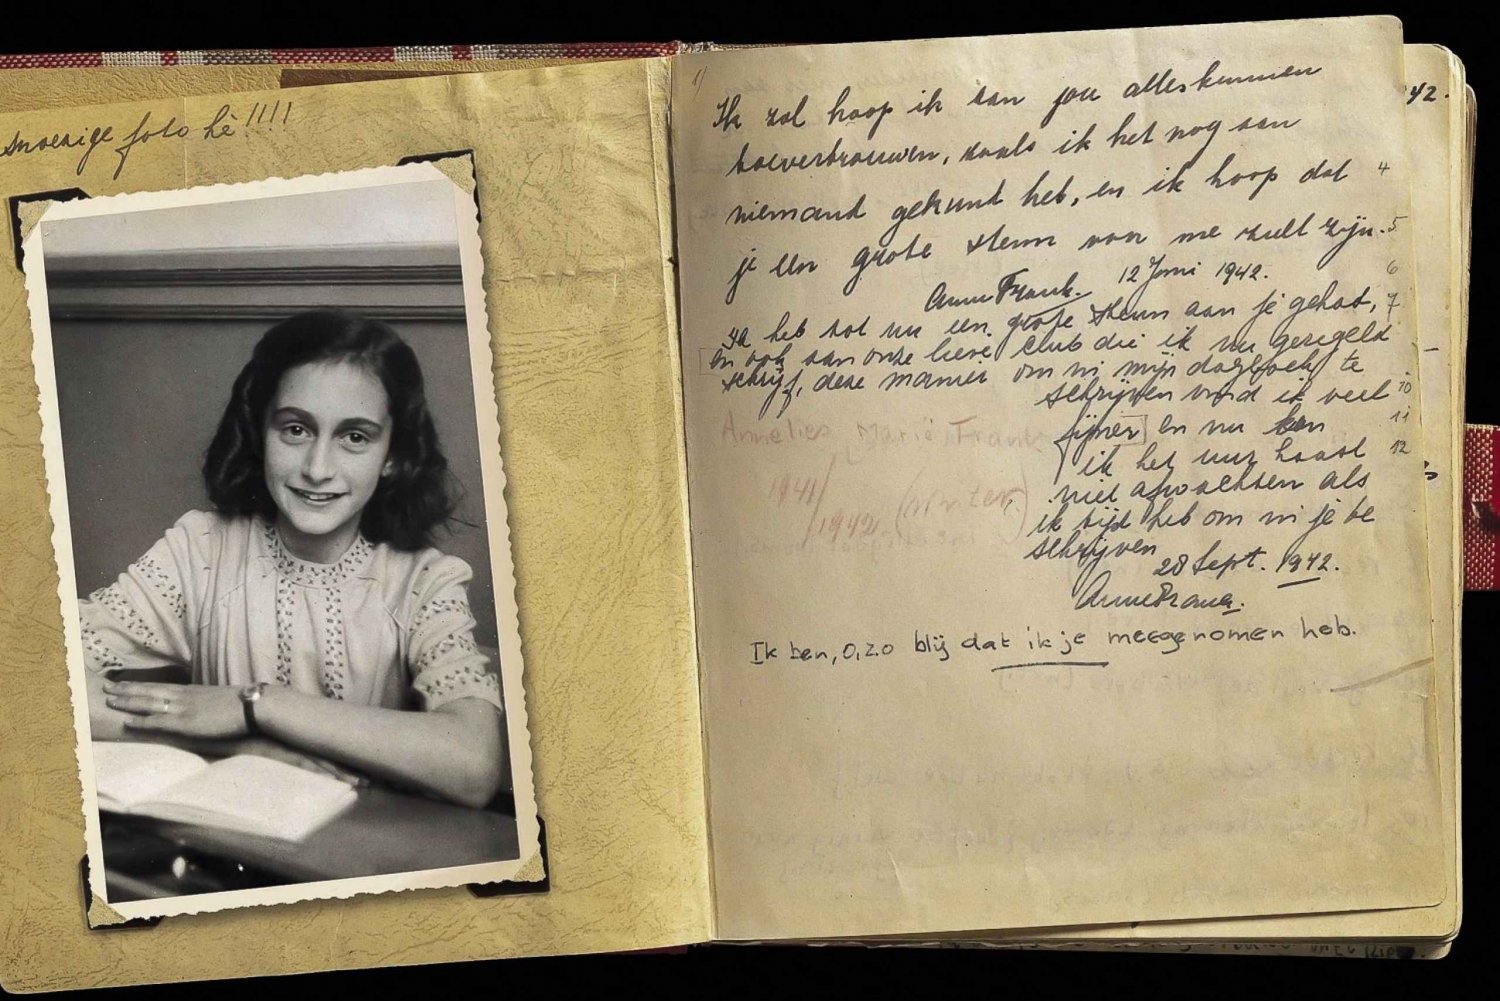 Amsterdam: Life of Anne Frank and Neighborhood Walking Tour